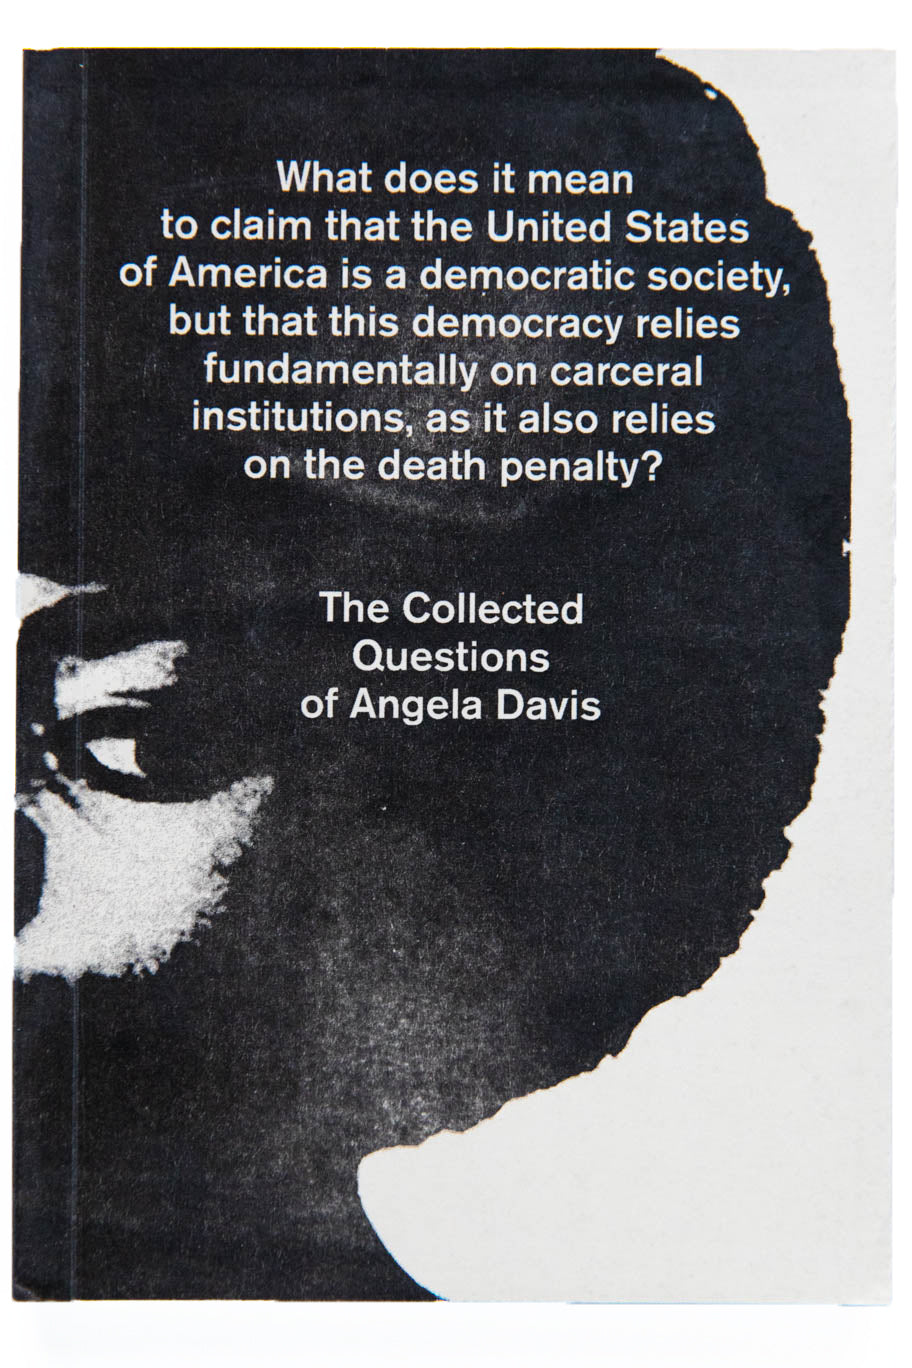 THE COLLECTED QUESTIONS OF ANGELA DAVIS